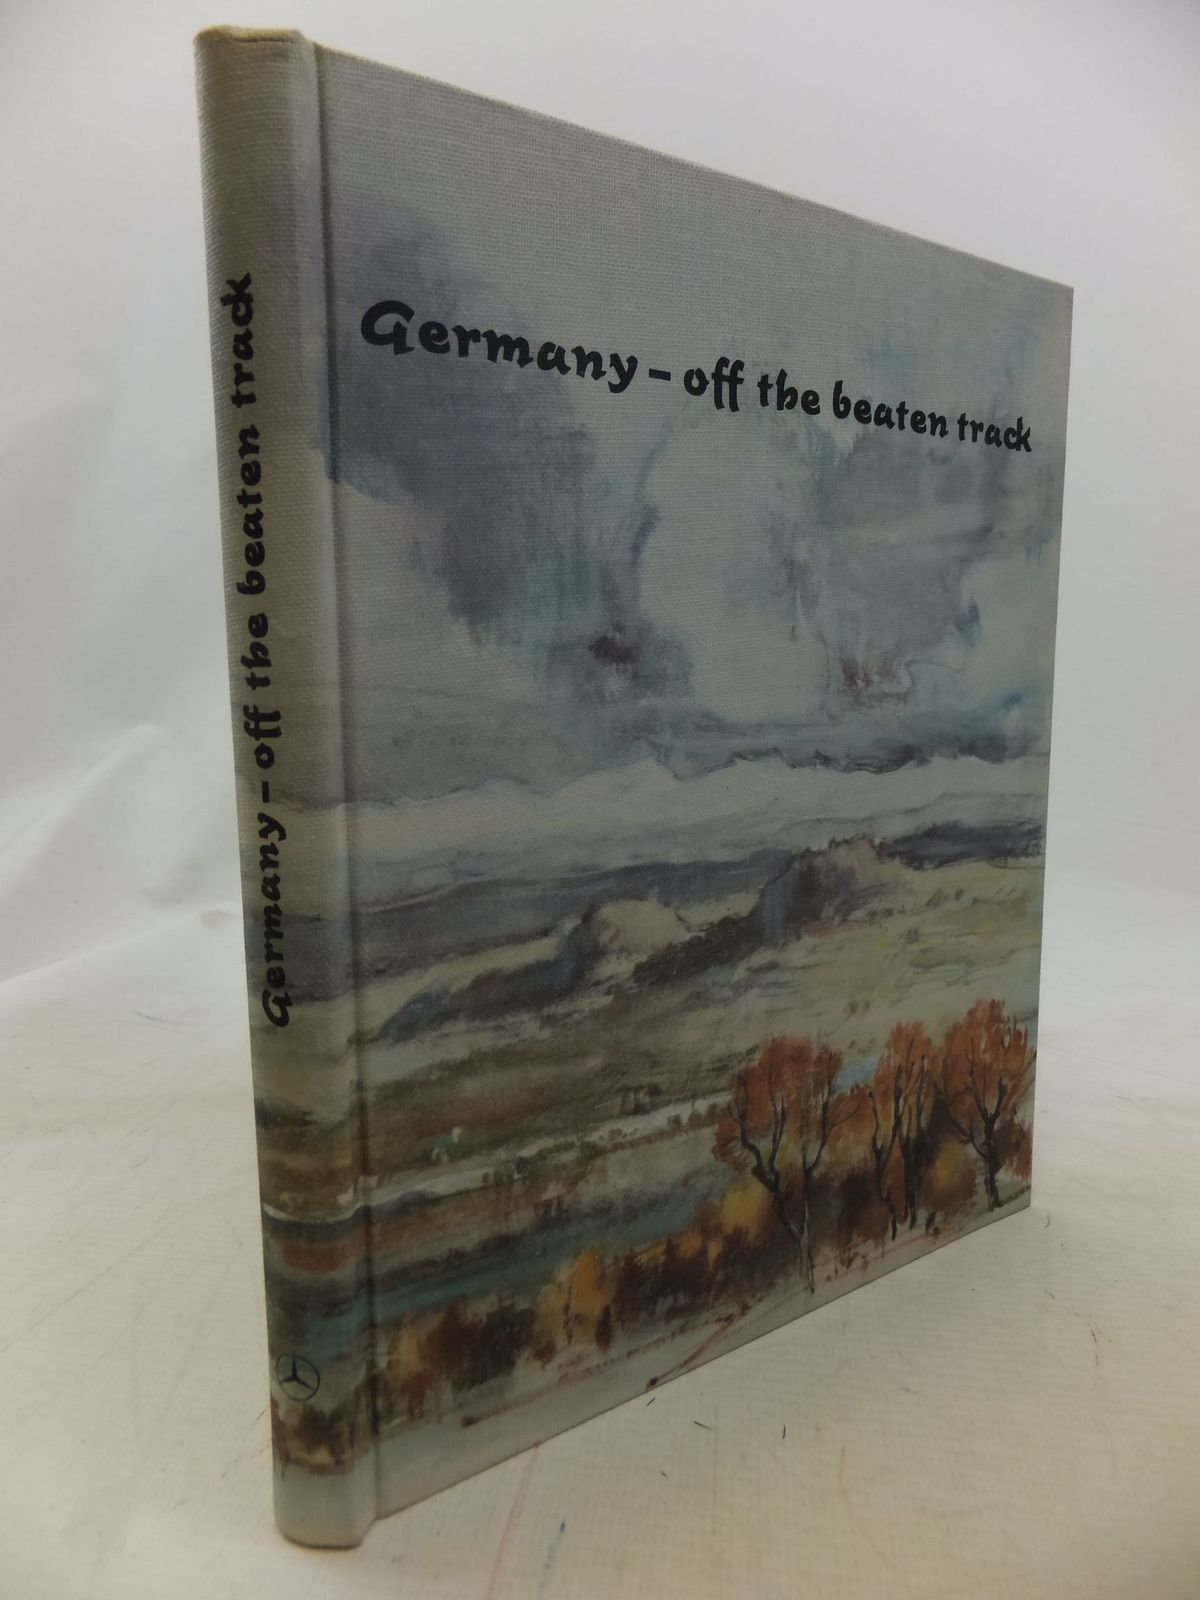 Photo of GERMANY - OFF THE BEATEN TRACK written by Friedrich, Hans Eberhard illustrated by Liska, Hans published by Verlag Mensch, Arbeit Munich (STOCK CODE: 1711390)  for sale by Stella & Rose's Books